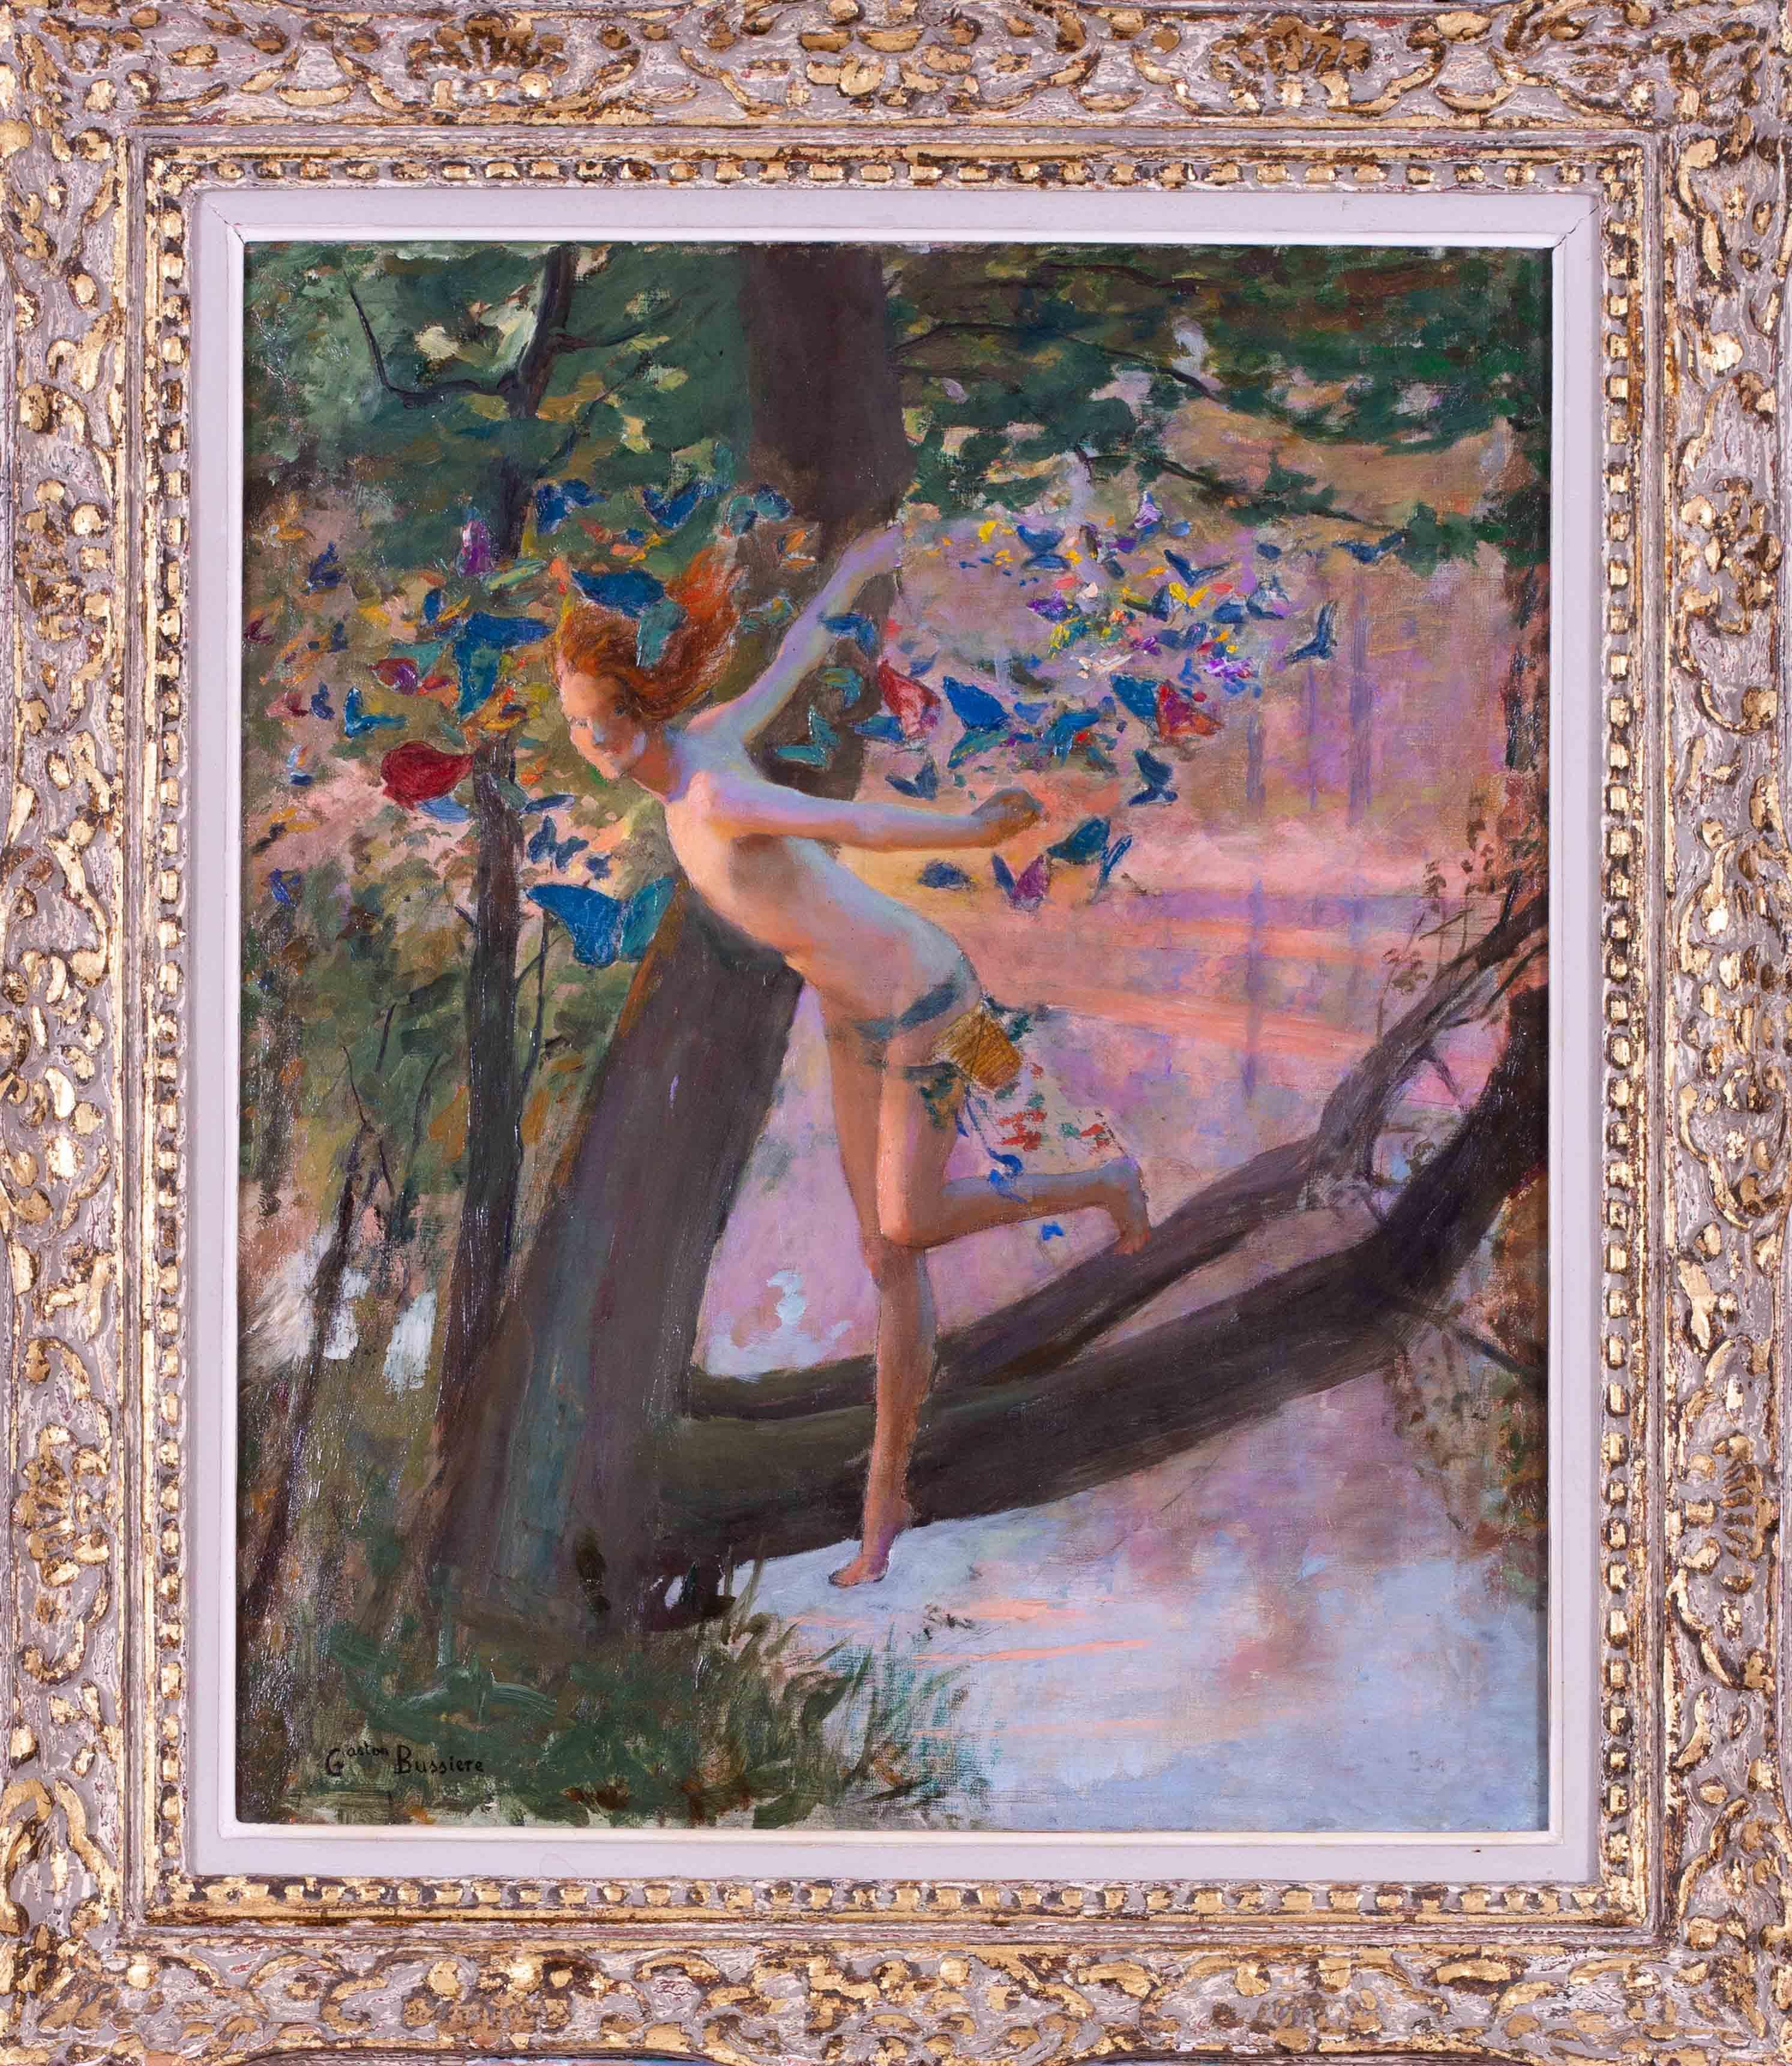 Gaston Bussiere (French, 1862 – 1928)
The sprite of summer
Oil on canvas
Signed ‘Gaston Bussiere’ (lower left)
25.1/2 x 21.1/4 in. (64.8 x 54 cm.)

In a carved gilt frame with gilded detail and intentionally stressed painted sections with a grey and